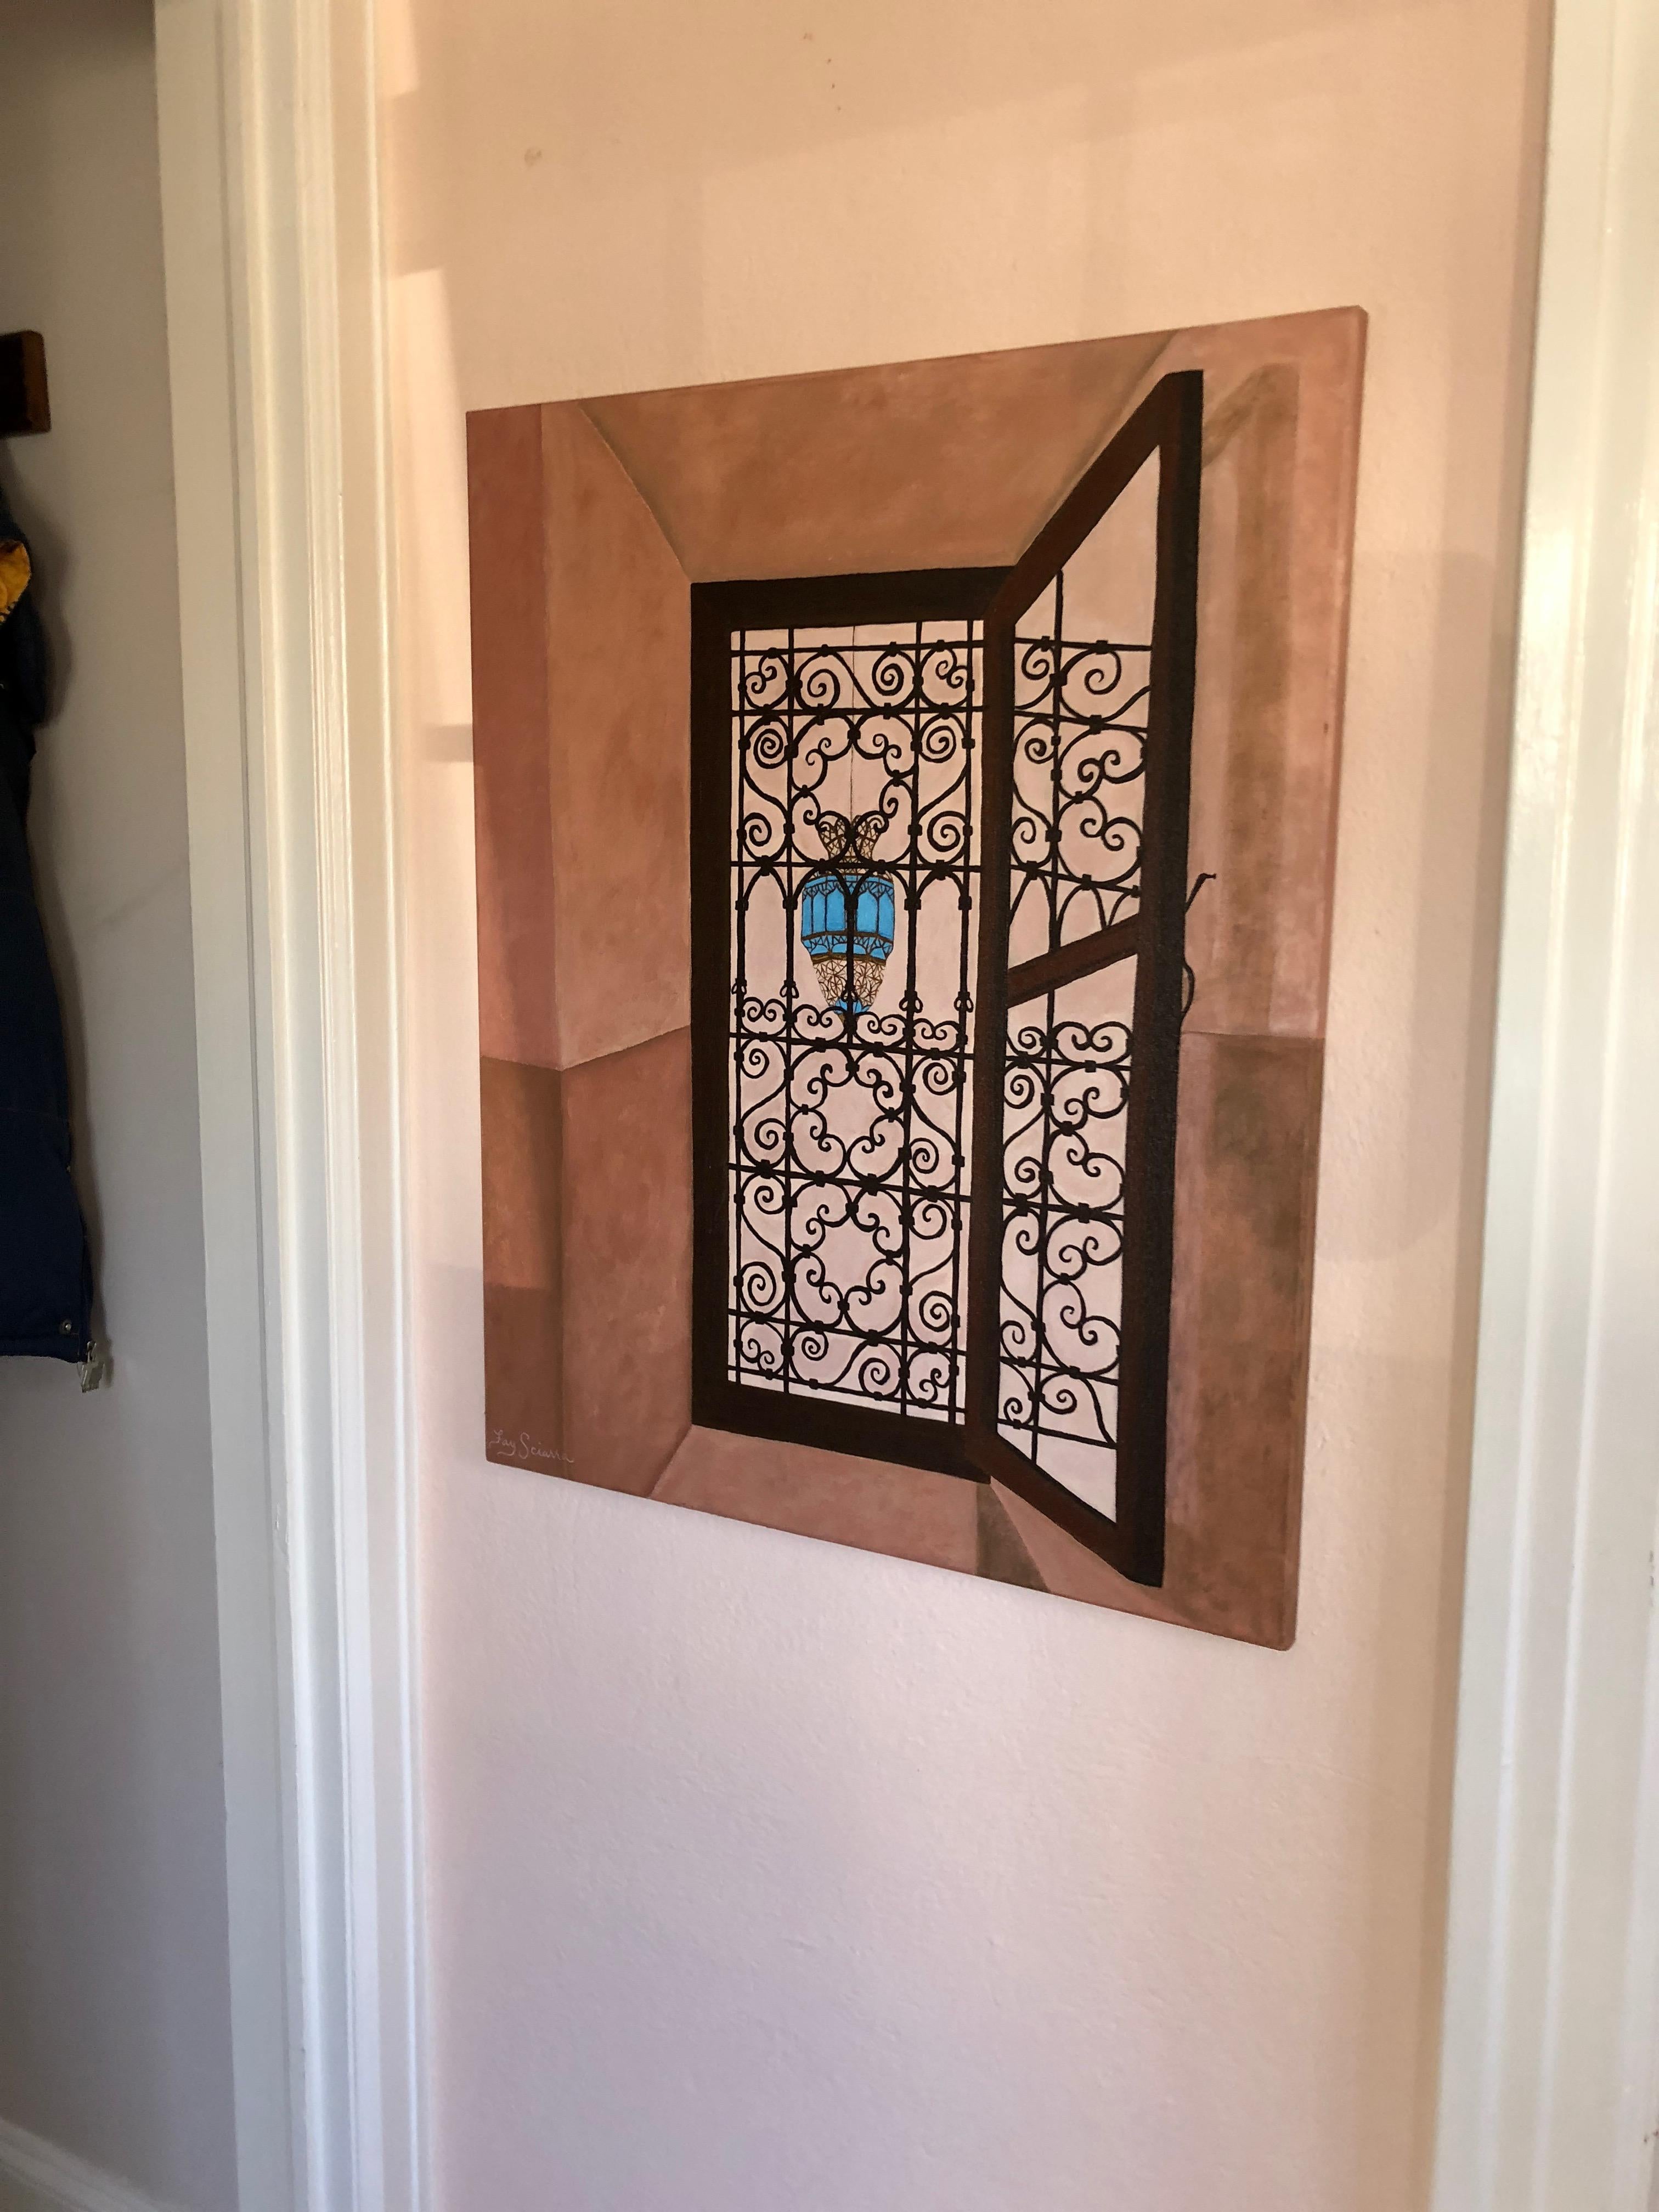 A stunning original painting on canvas inspired by a narrow rectangular window in a stucco Moroccan riad having meticulous curliecue designs on an iron grill. View through the opening is of a typical Morrocan style light pendant. Color palette is an